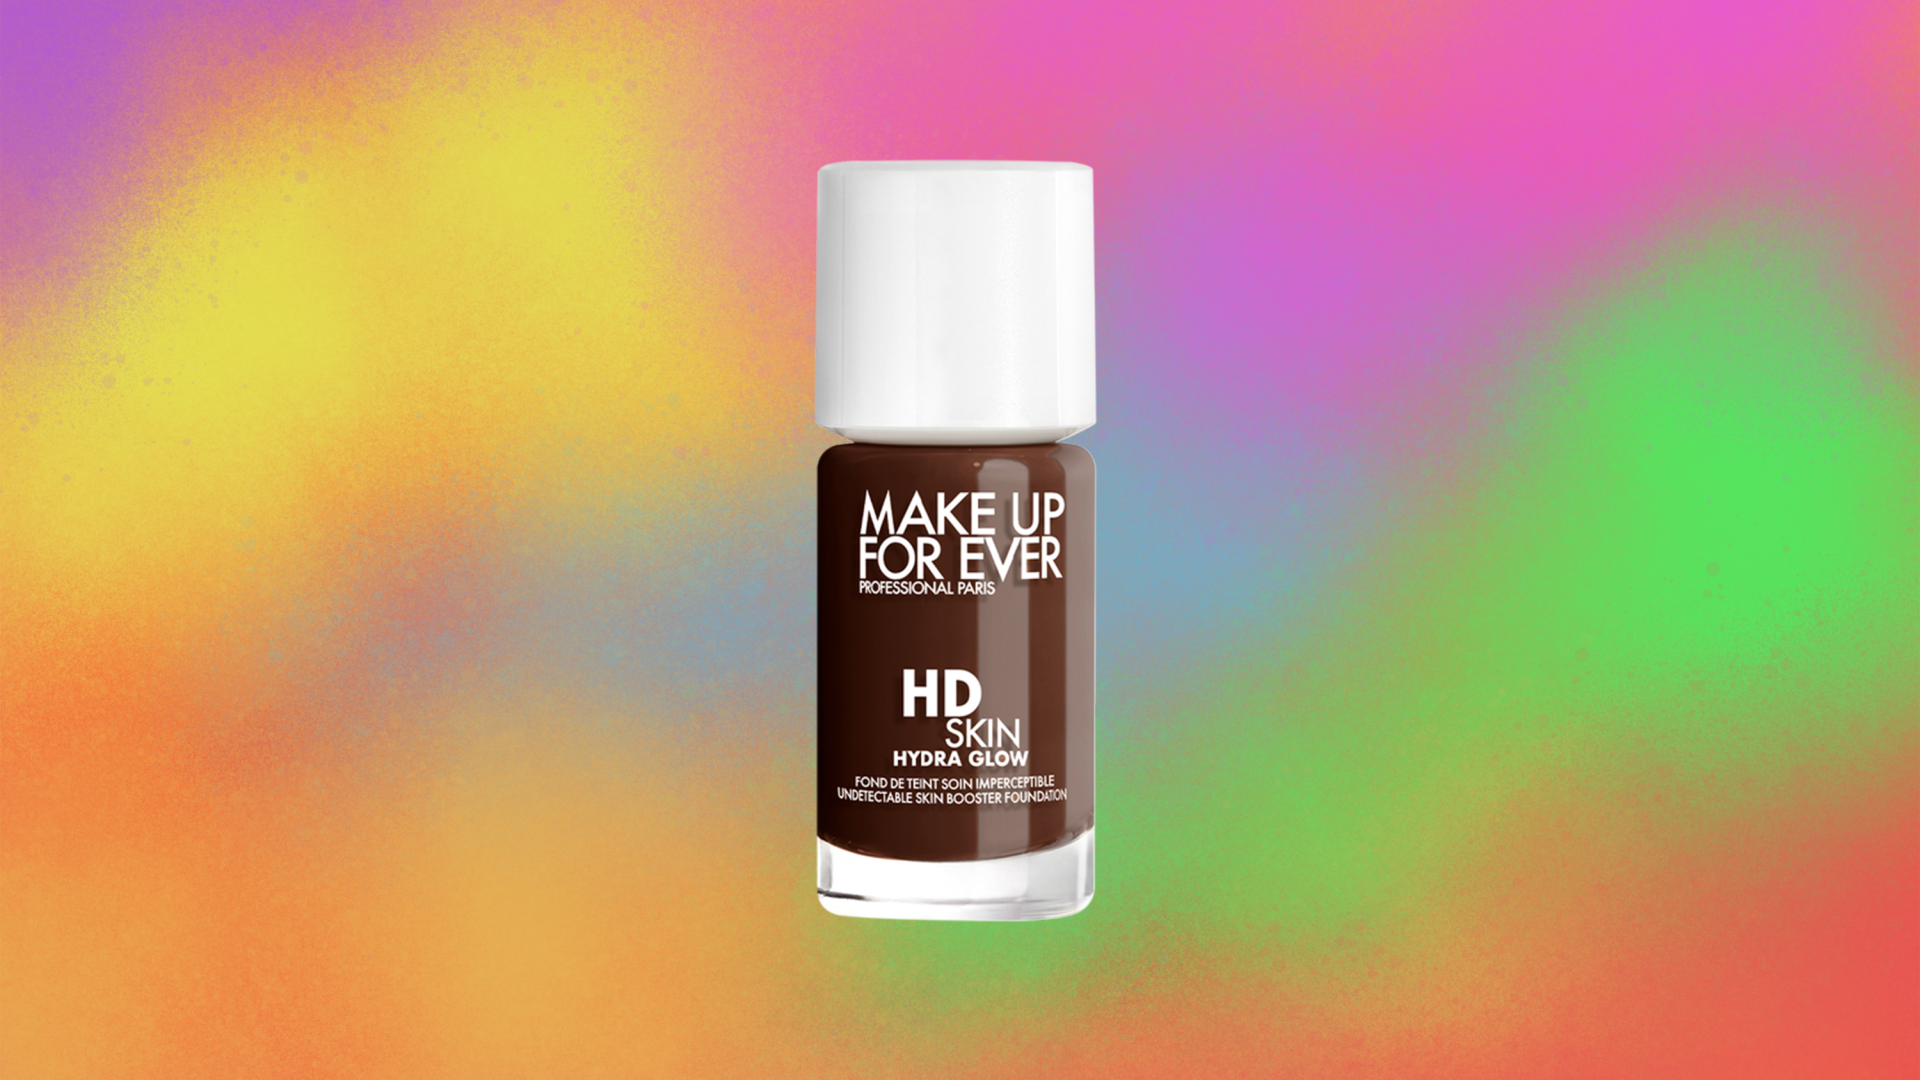 Product of the Week: Make Up For Ever HD Hydra Glow Foundation